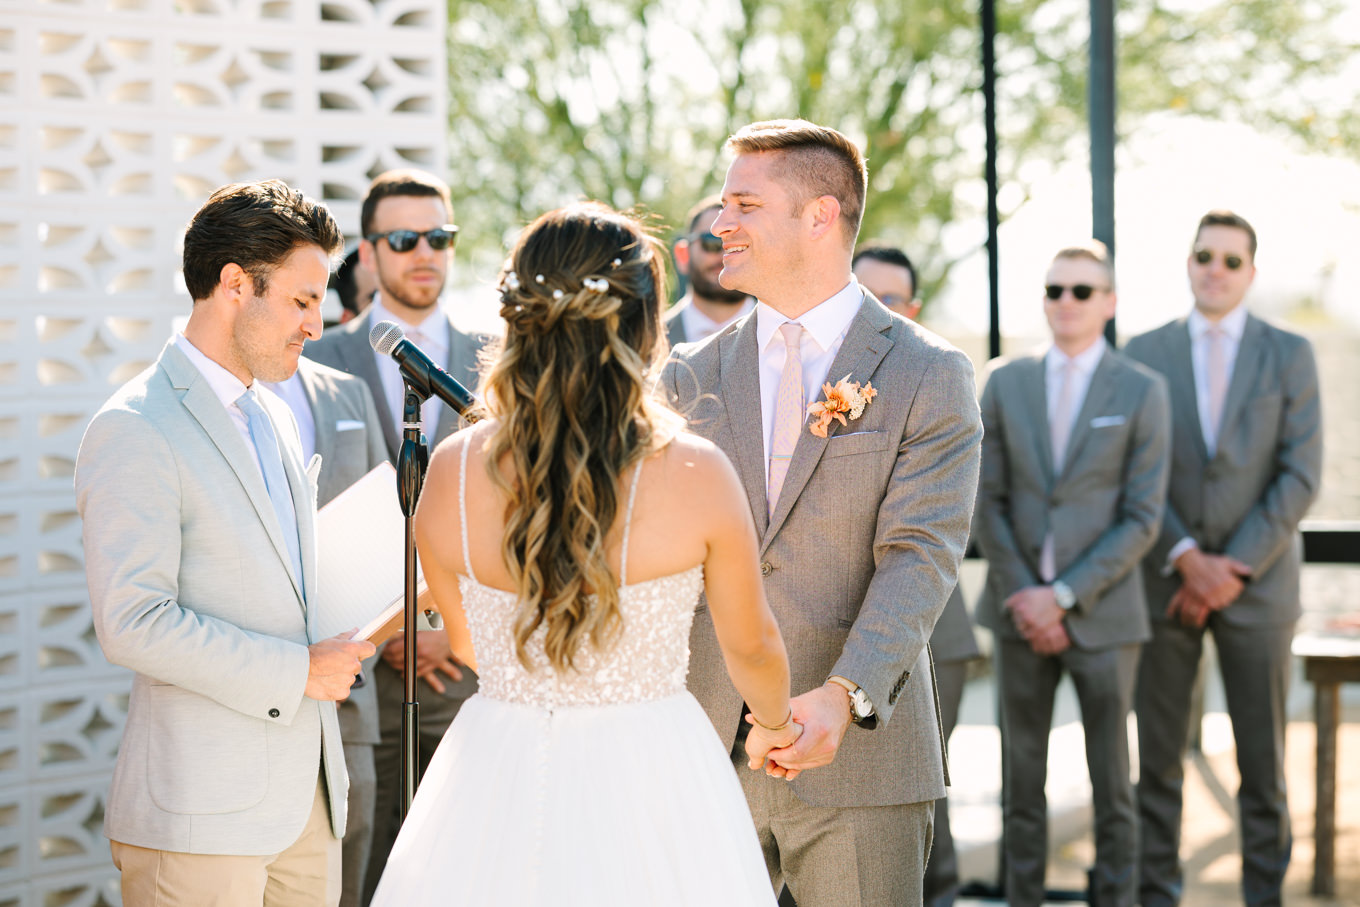 Wedding ceremony | Pink and orange Lautner Compound wedding | Colorful Palm Springs wedding photography | #palmspringsphotographer #palmspringswedding #lautnercompound #southerncaliforniawedding  Source: Mary Costa Photography | Los Angeles